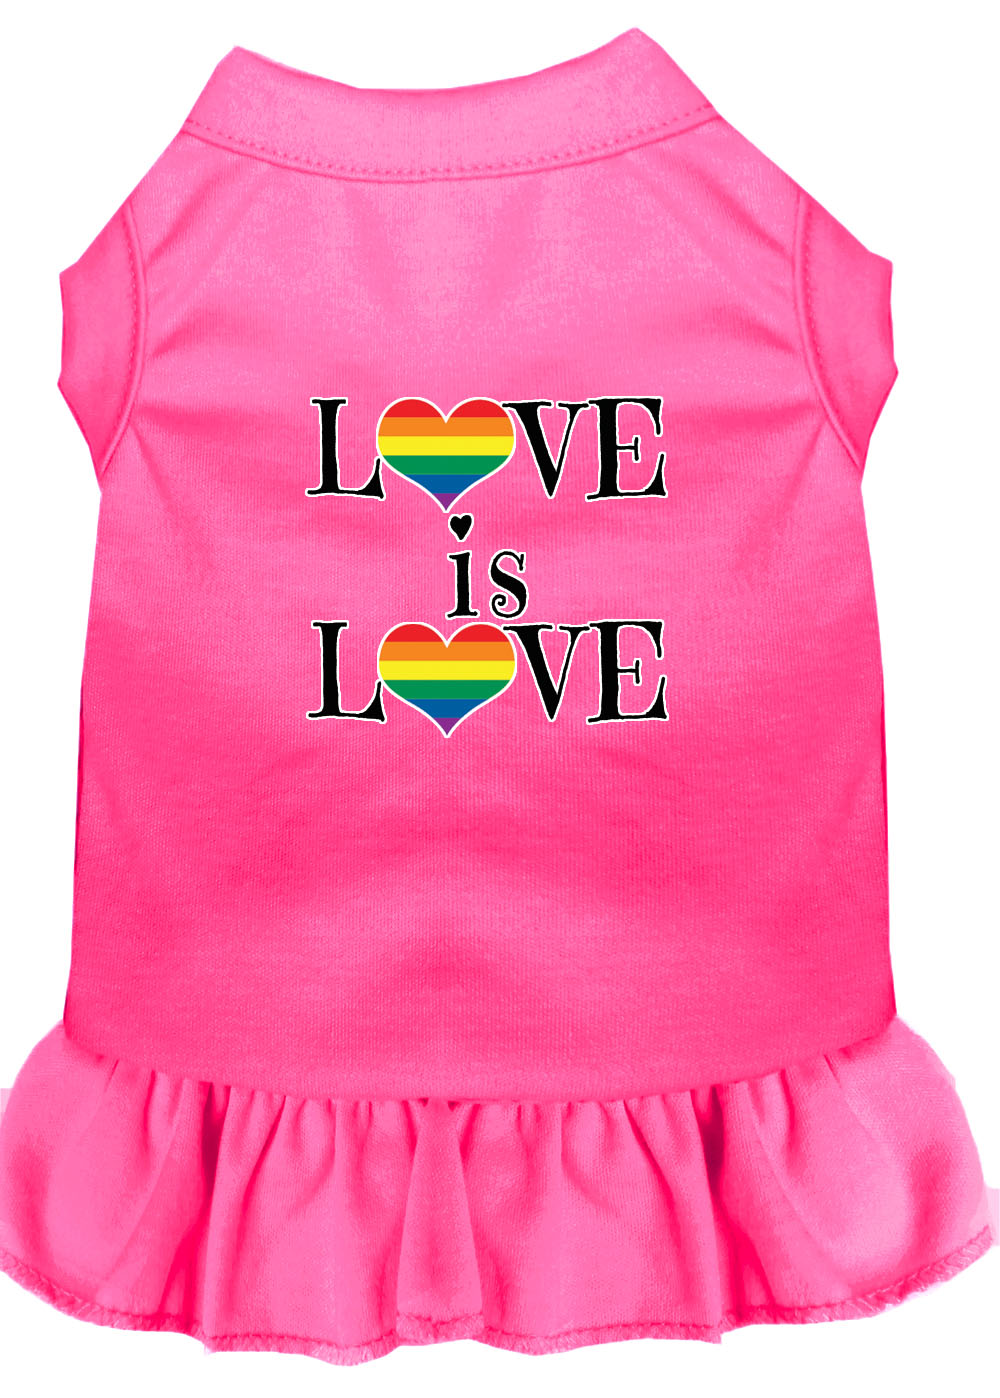 Love is Love Screen Print Dog Dress Bright Pink Med